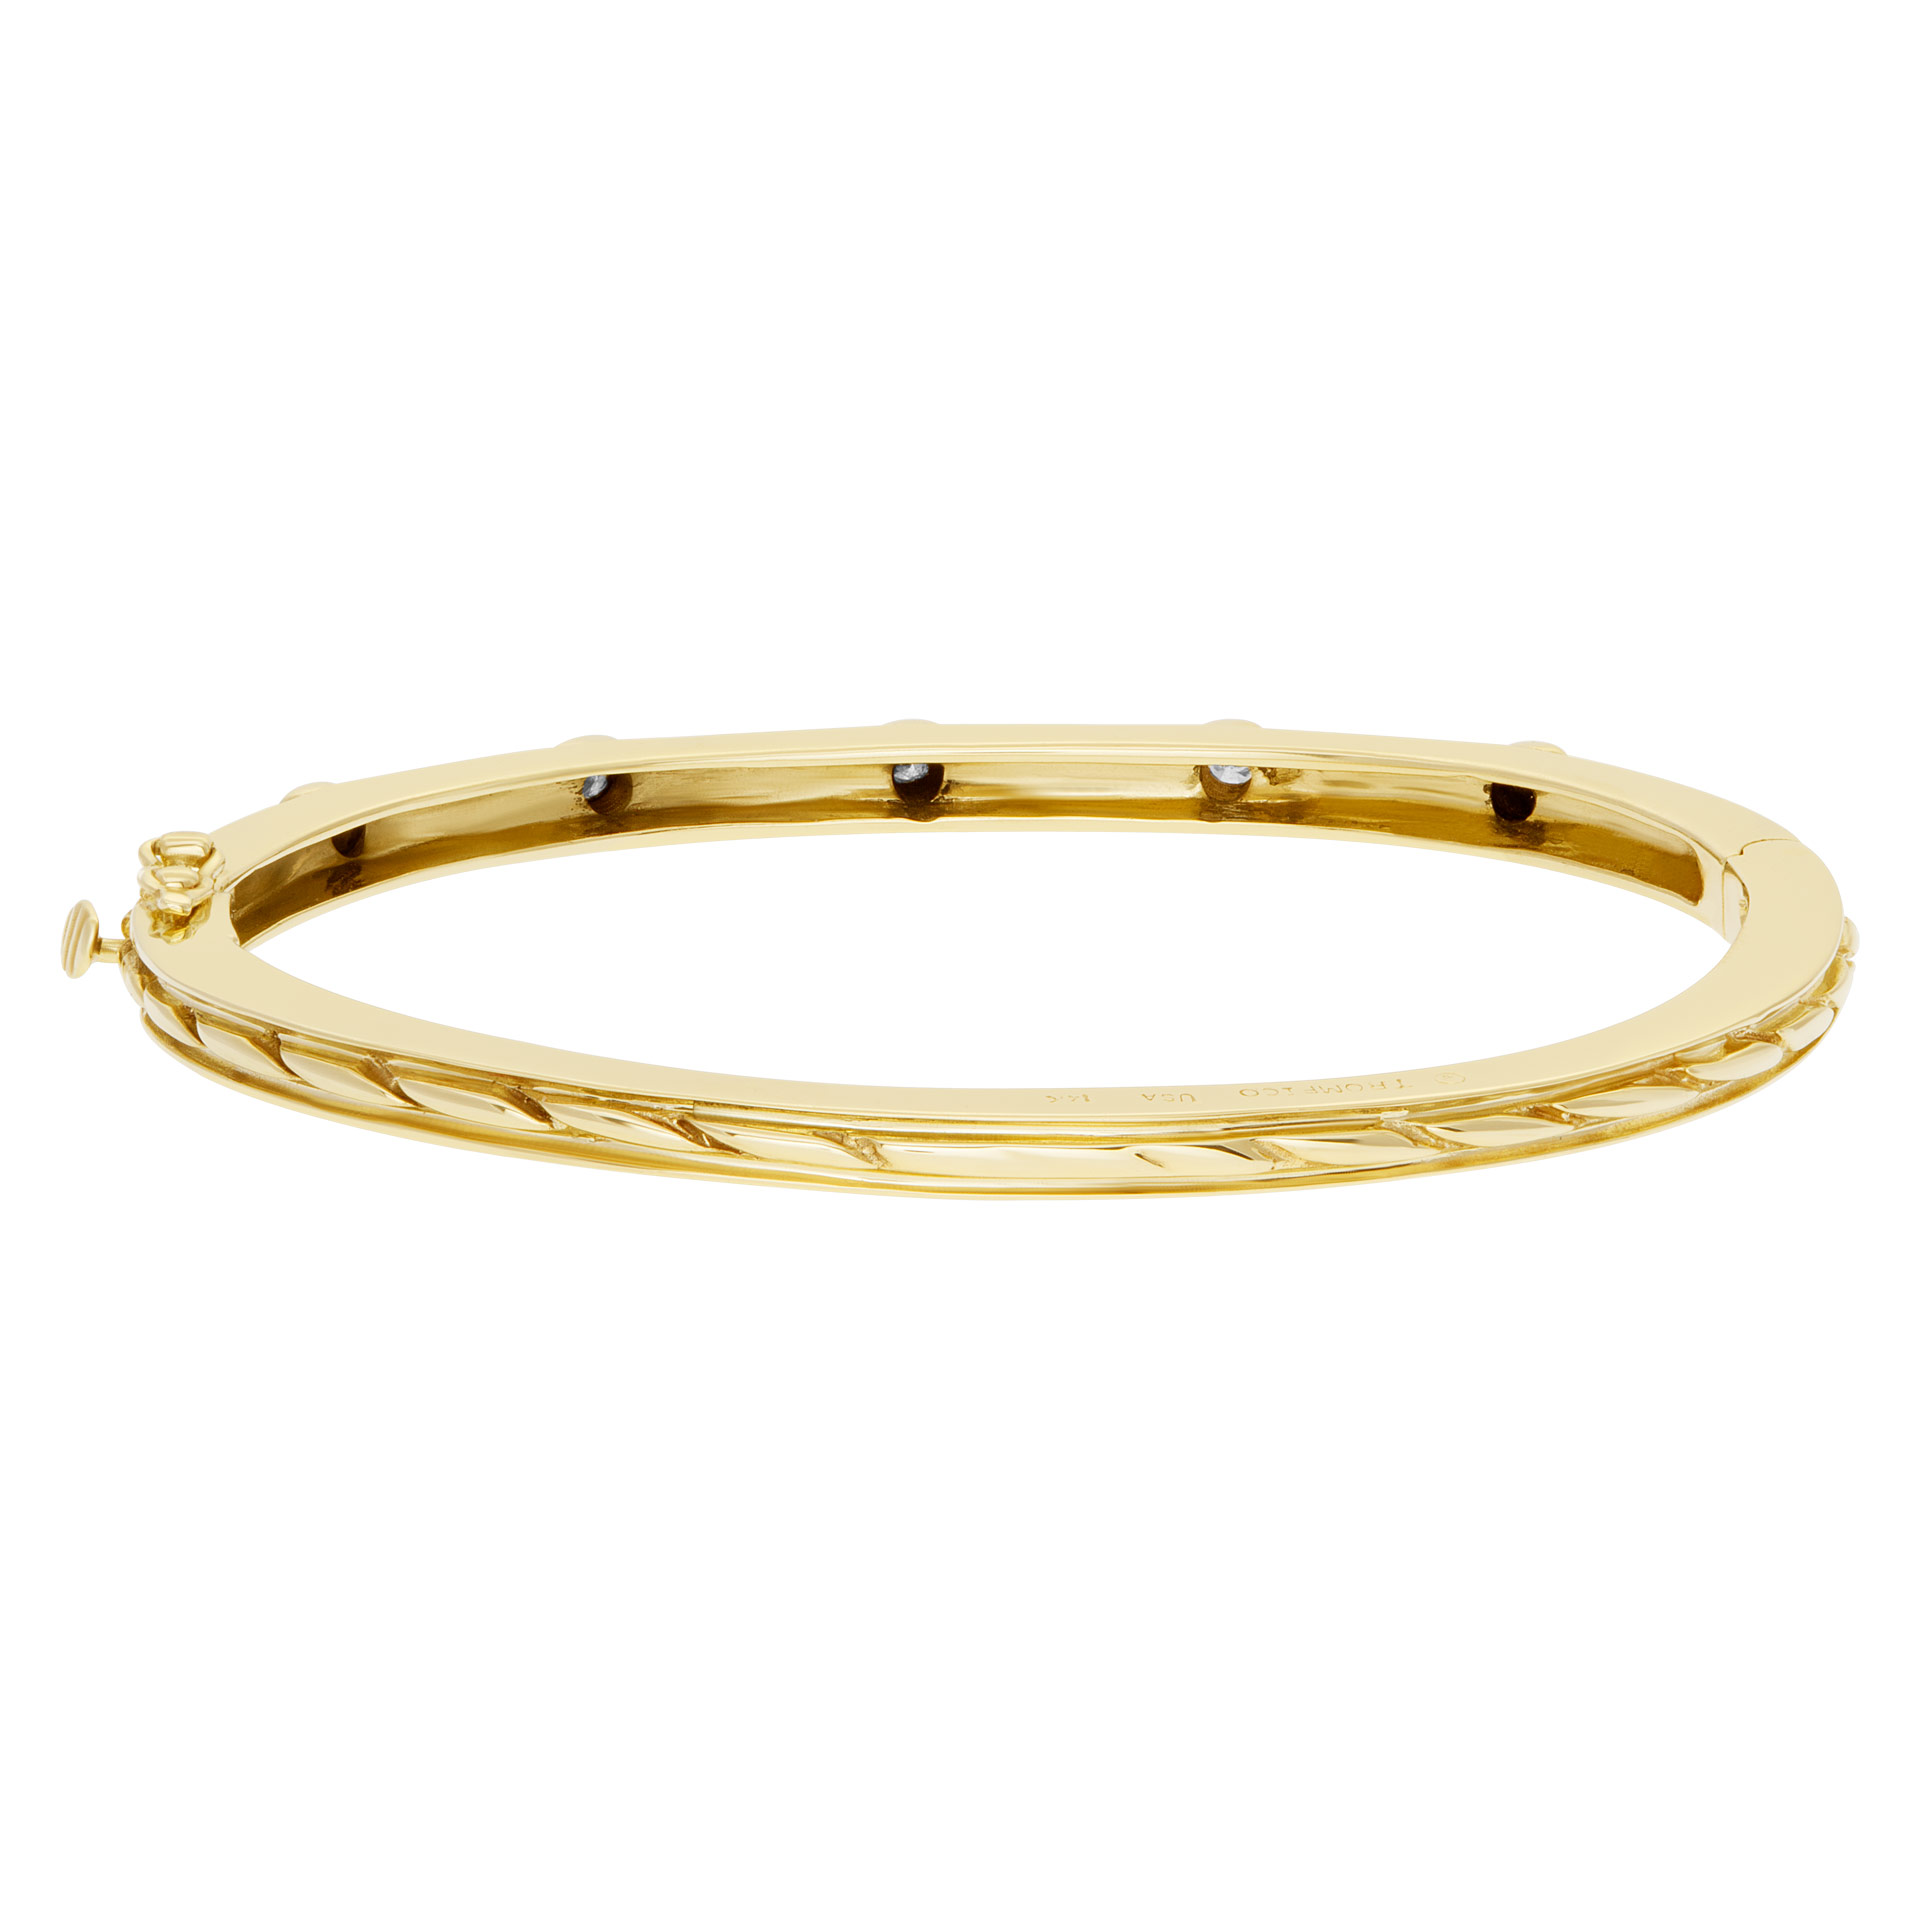 Bangle bracelet with 5 swirls in 14k yellow gold and diamonds image 3